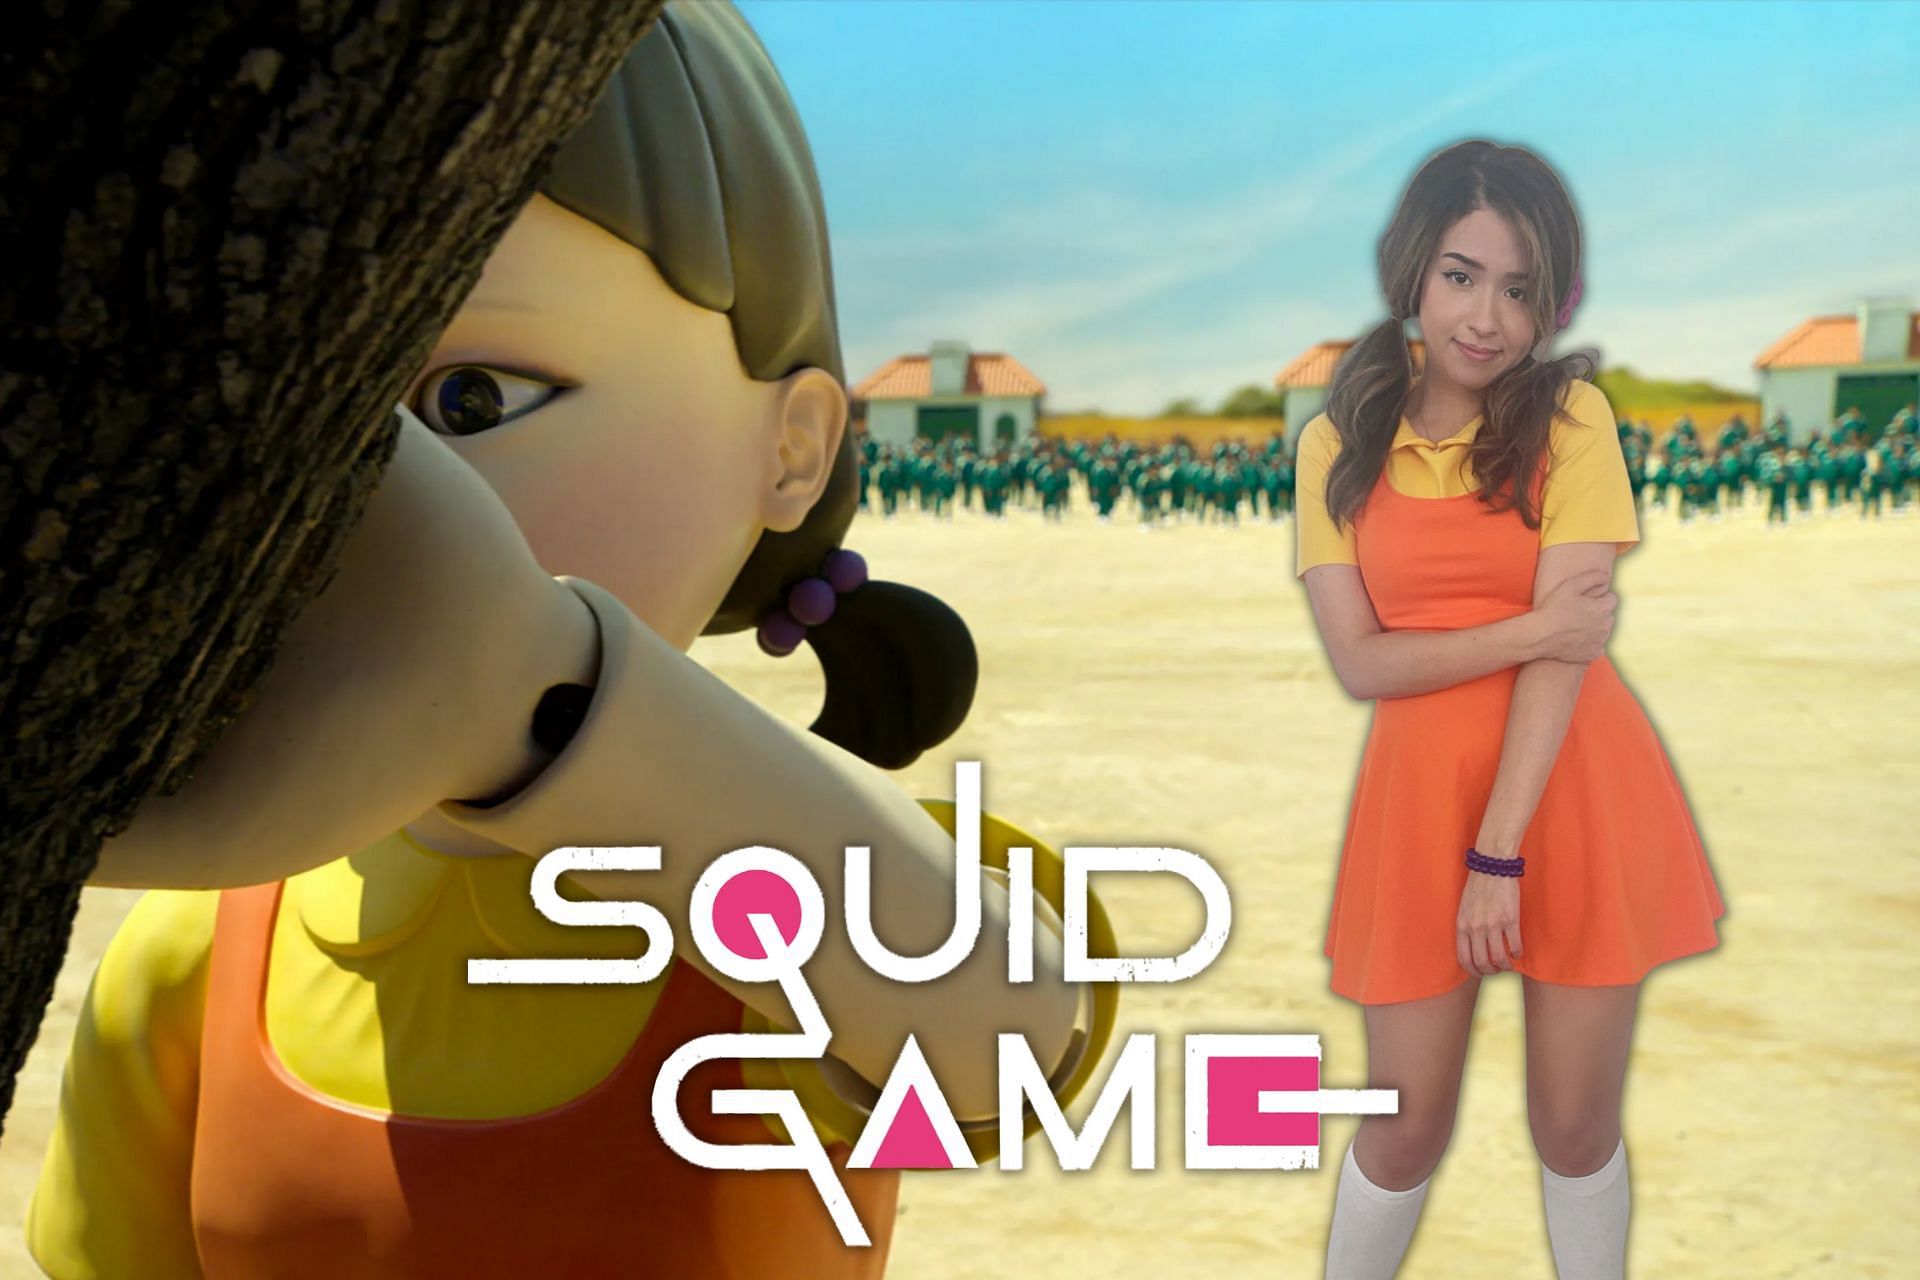 Pokimane awes the internet with her Squid Game inspired outfit (Image via Sportskeeda)